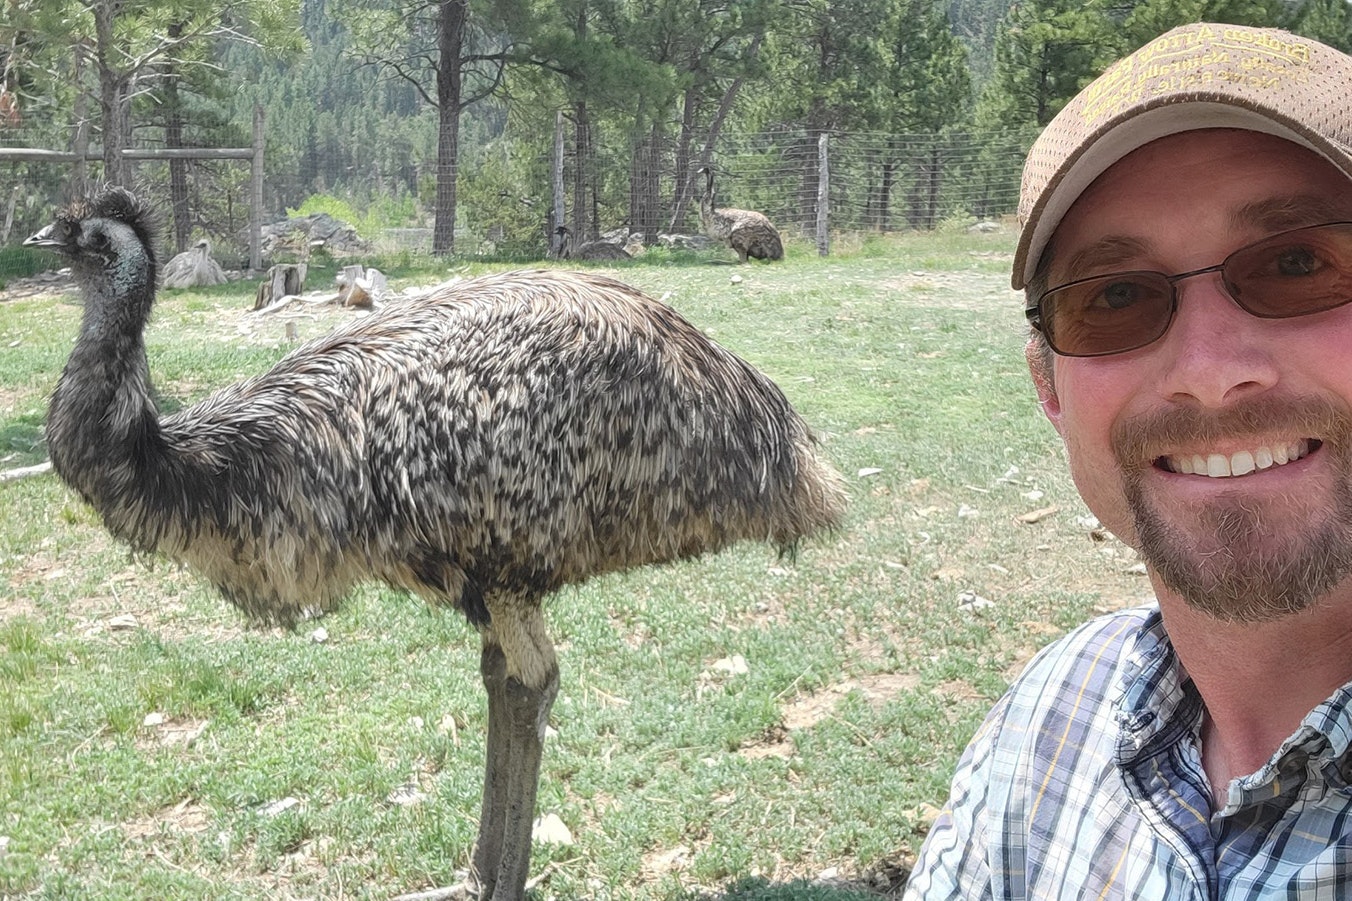 Newcastle farmer Paul Eitel with one of his emus.